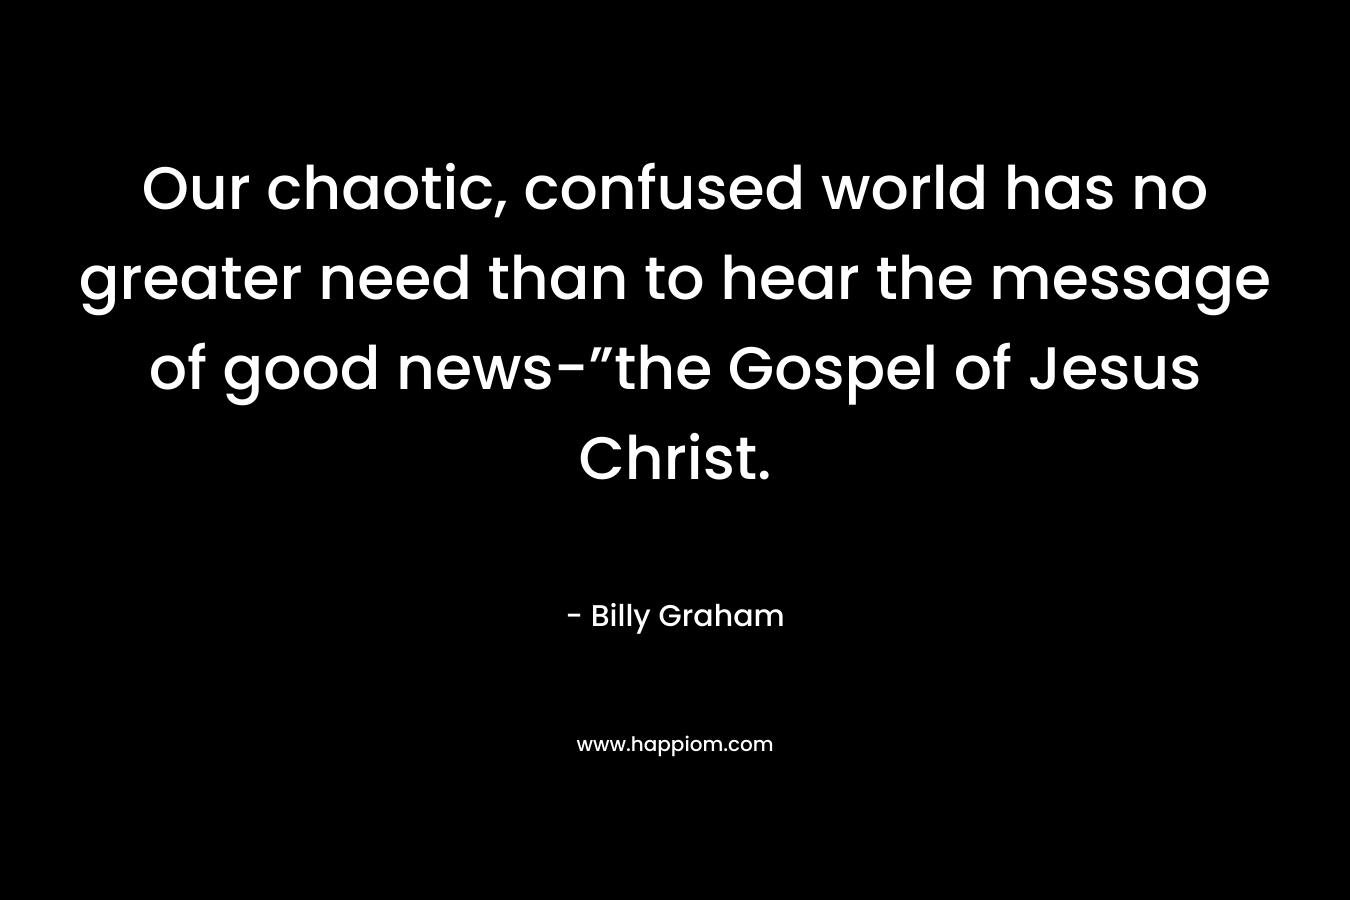 Our chaotic, confused world has no greater need than to hear the message of good news-”the Gospel of Jesus Christ.